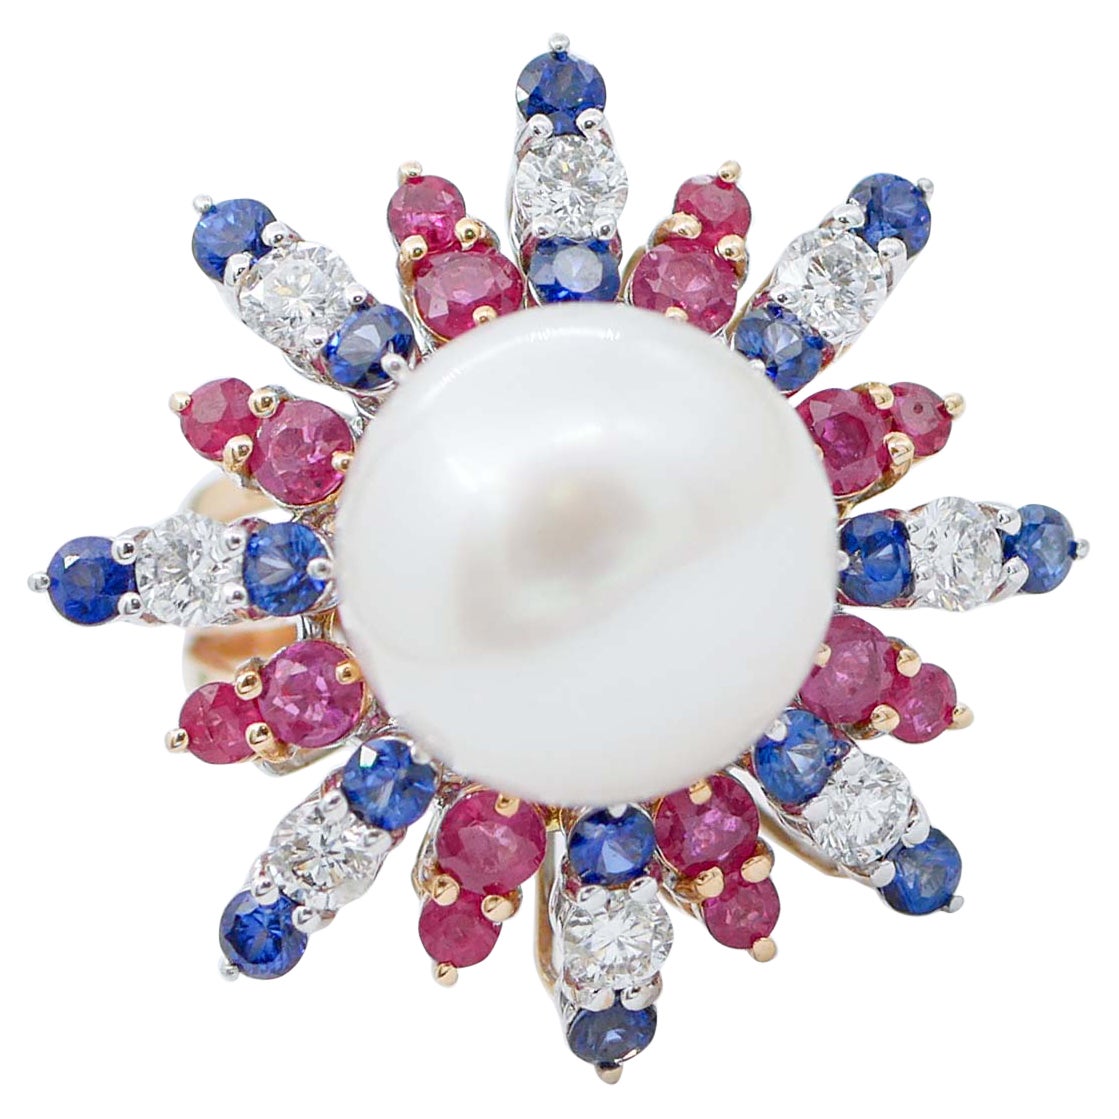 South-Sea Pearl, Rubies, Sapphires, Diamonds, 14 Karat Rose and White Gold Ring For Sale